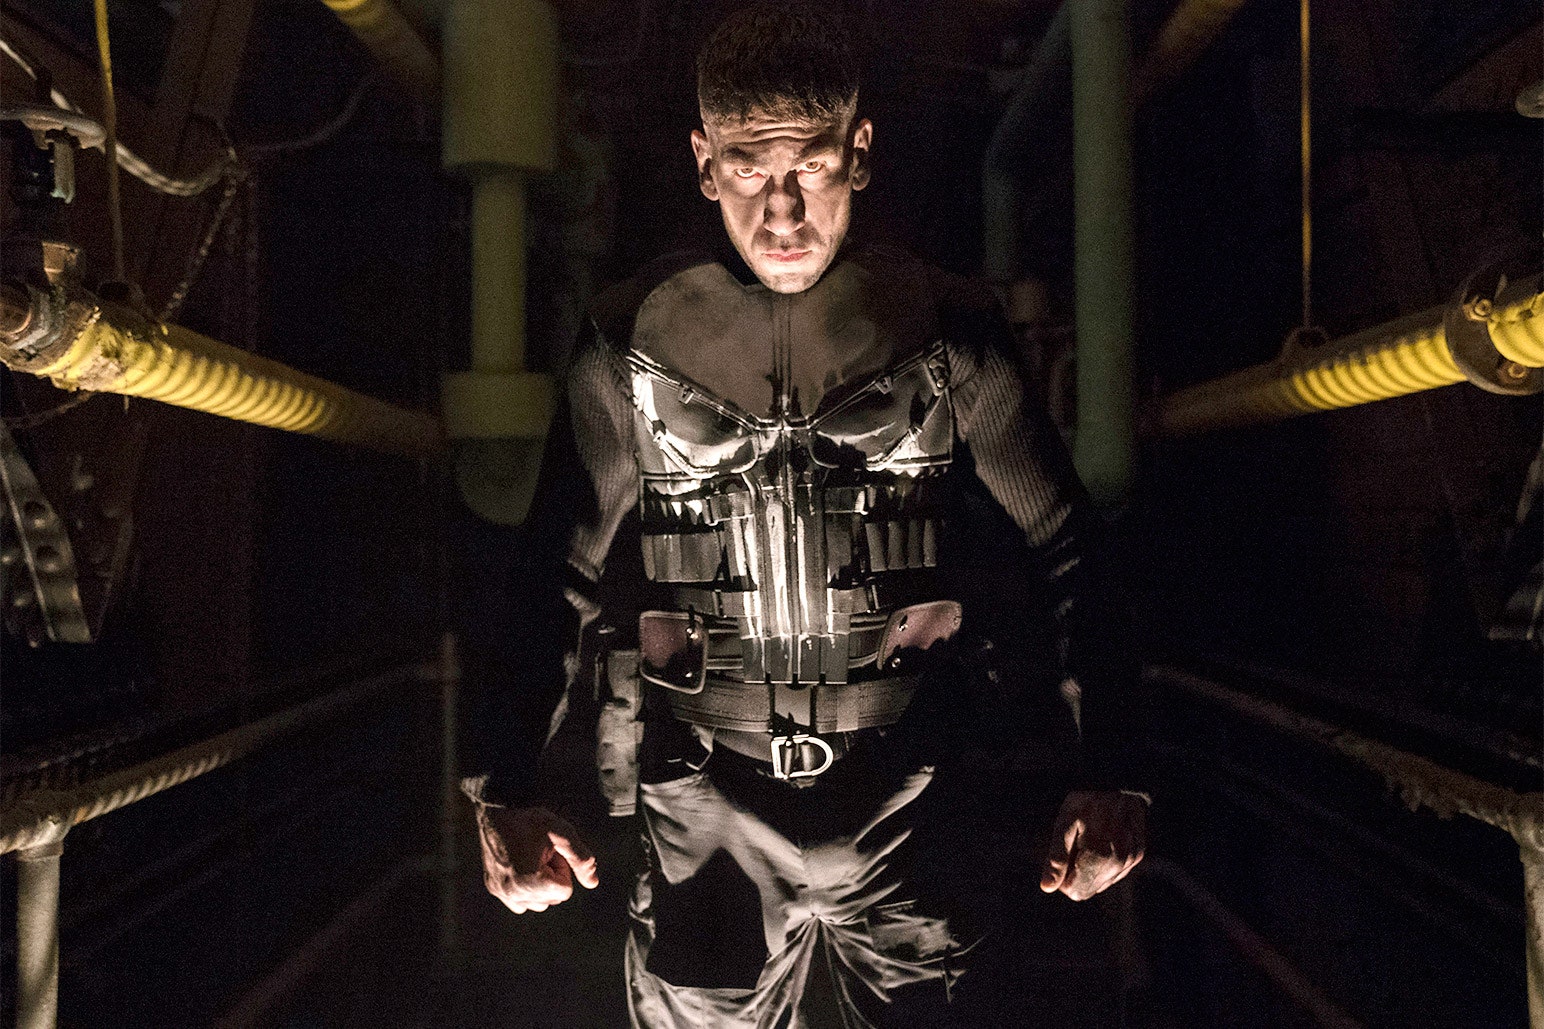 ‘The Punisher’ Seasons 1-2 Leaving Netflix in March 2022